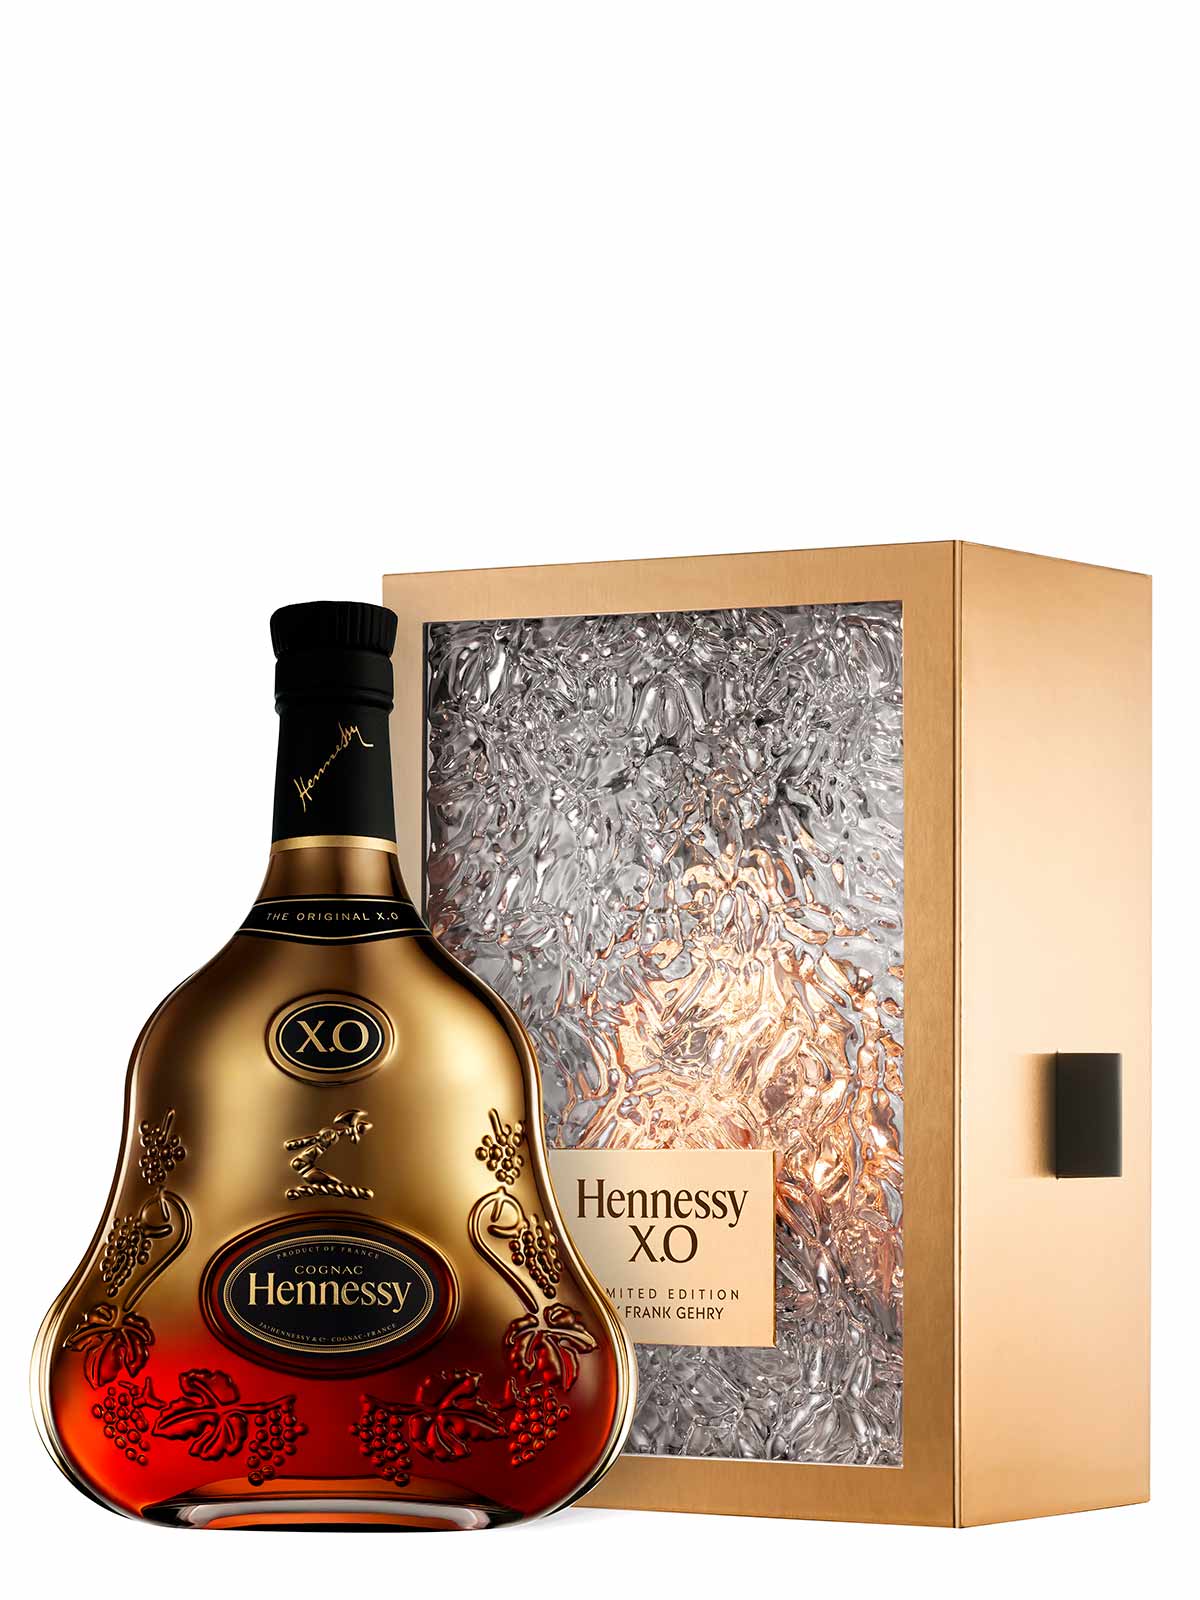 Hennessy XO limited edition BY FRANK GEHRY